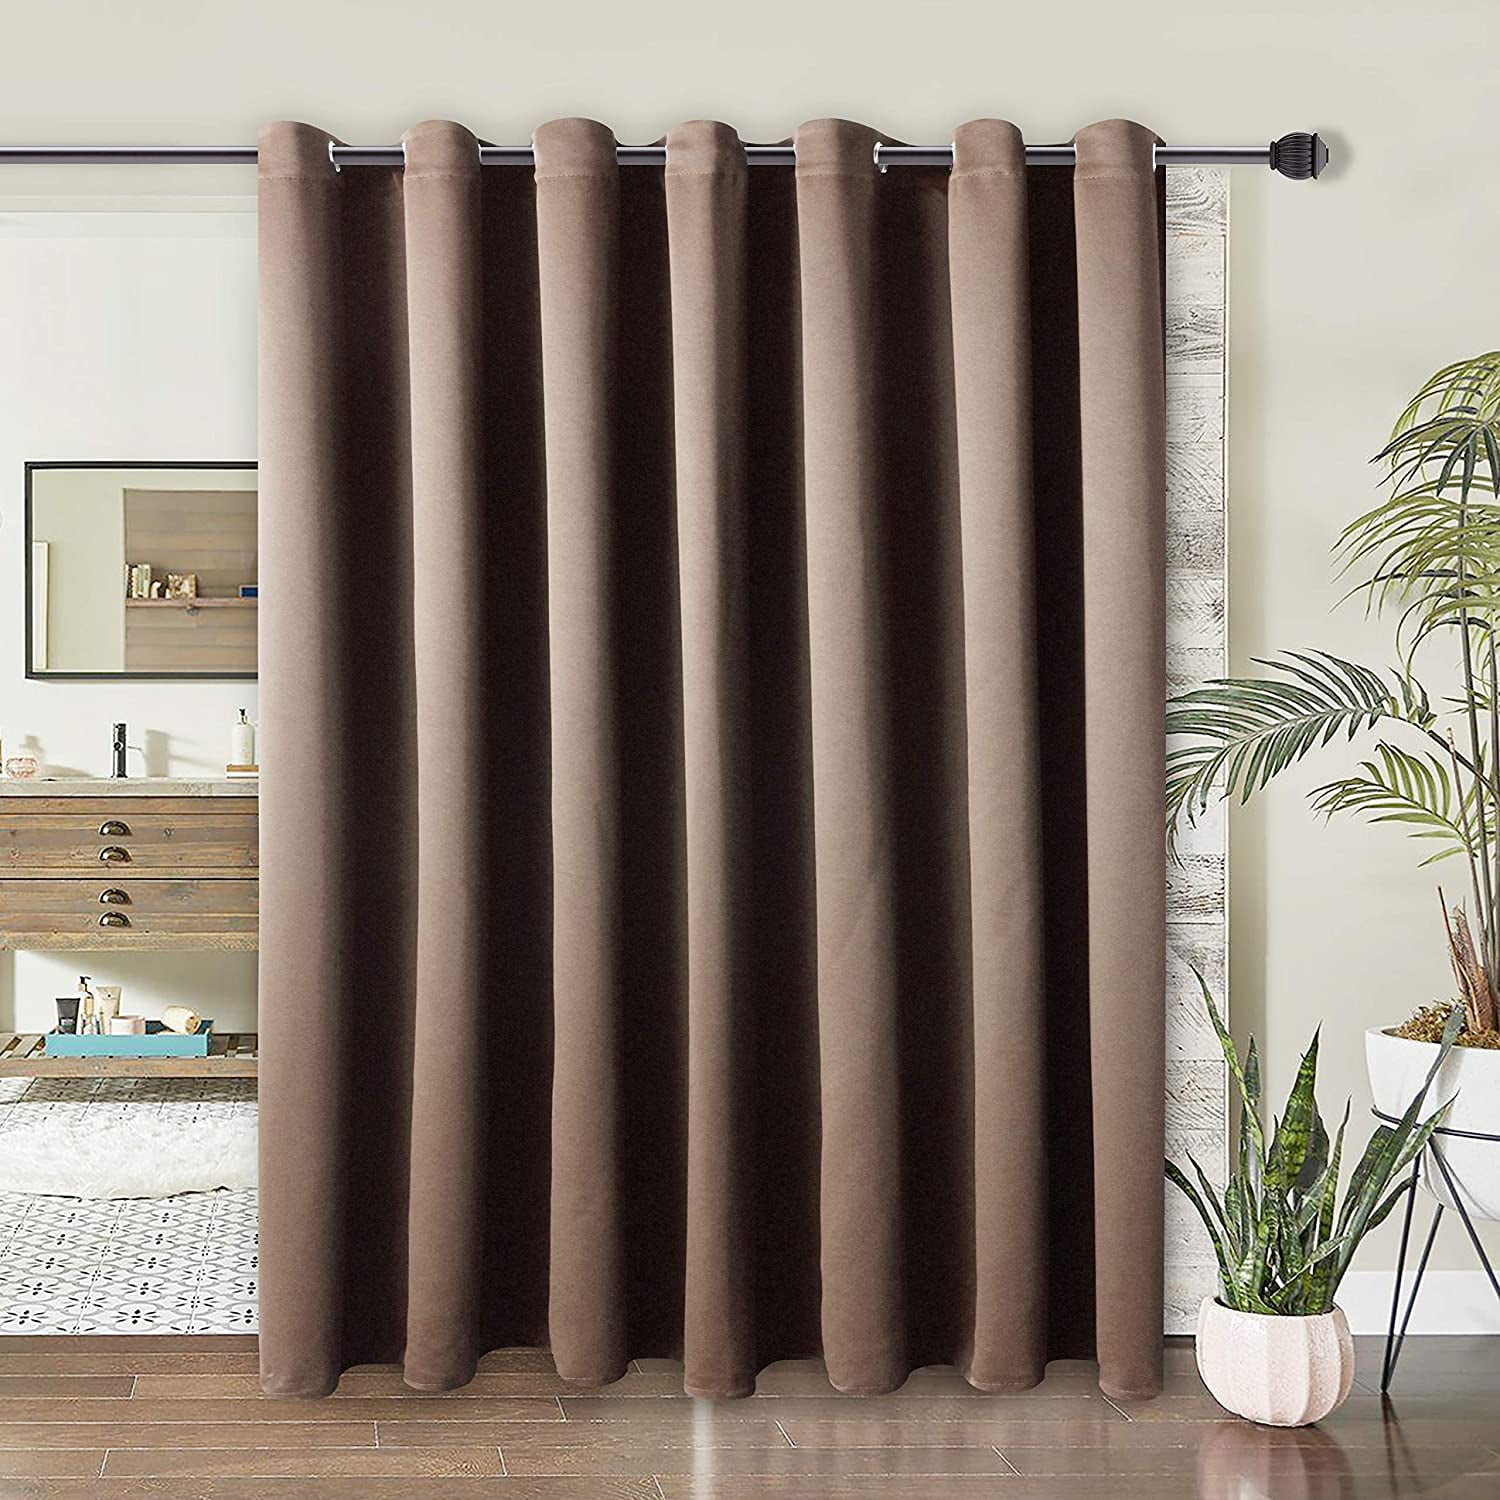 ROOM/SPACE DIVIDER PANEL GROMMET WINDOW CURTAIN THERMAL BLACKOUT 8' FT X 7'FT 